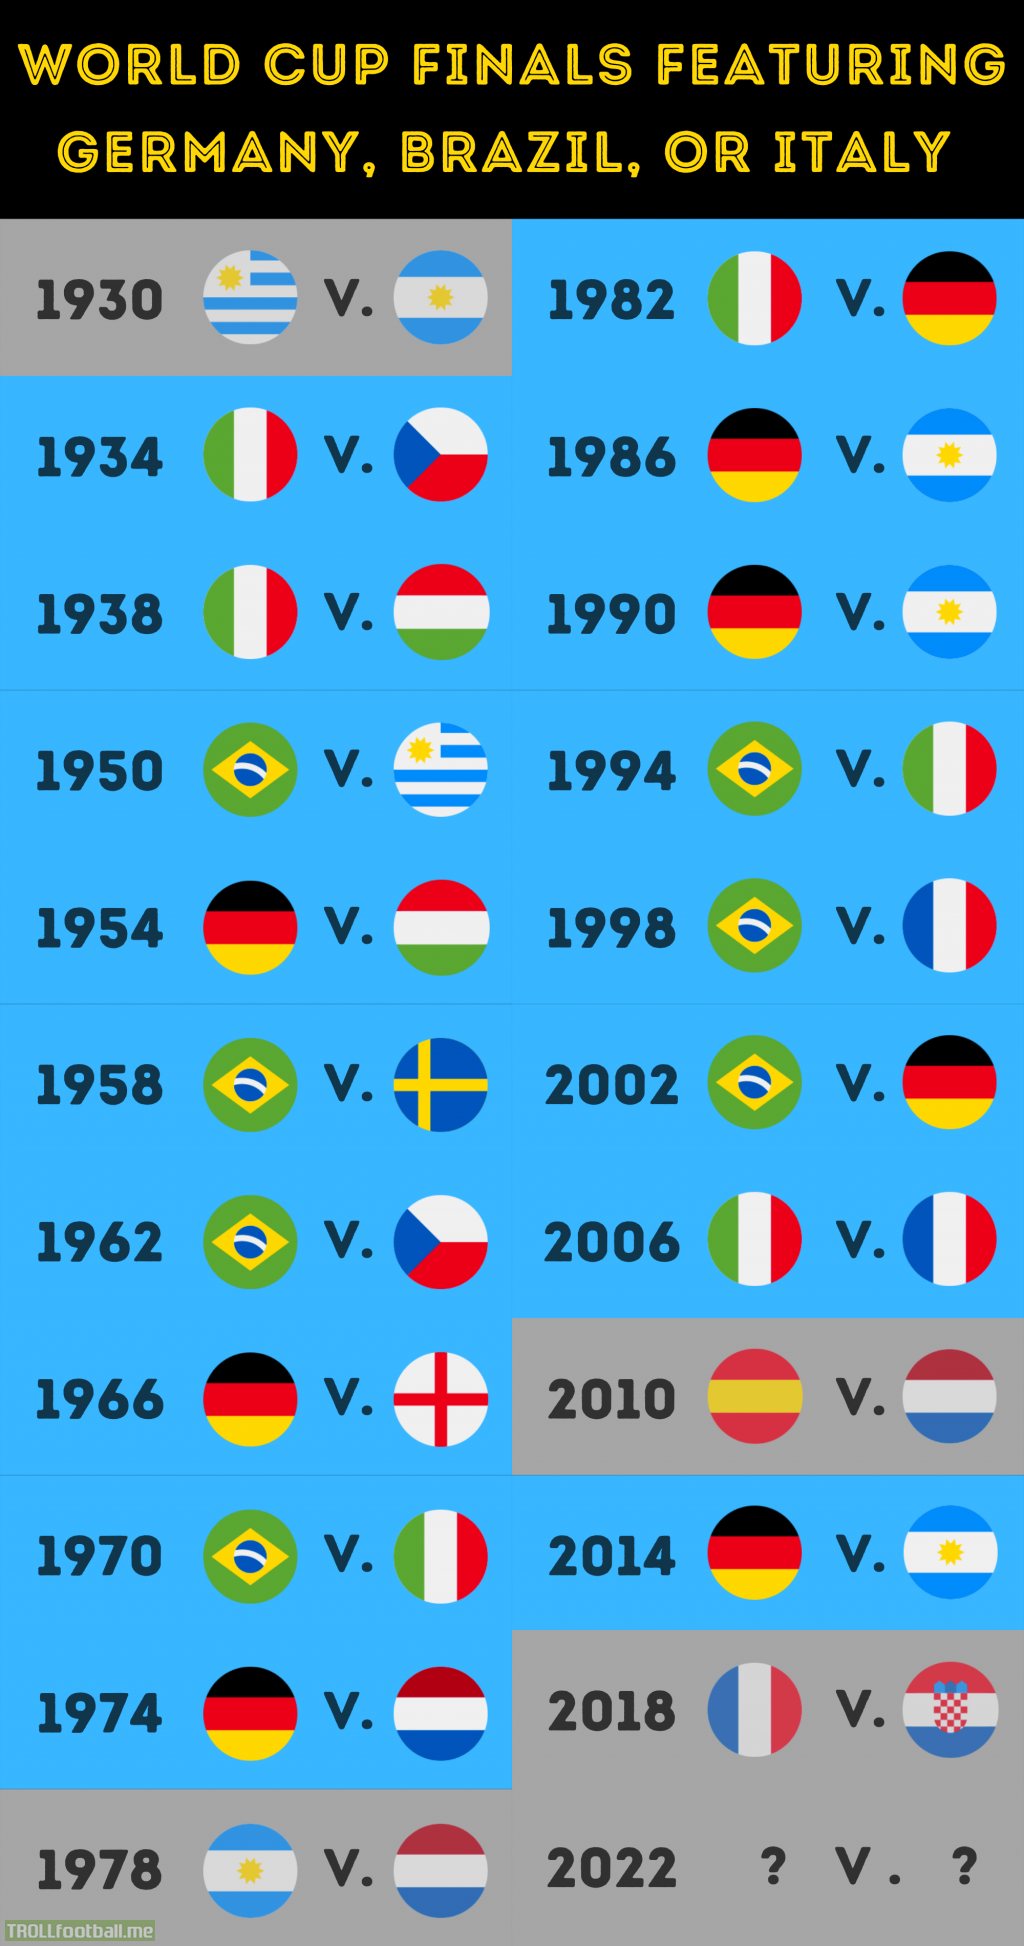 Germany, Brazil, or Italy have reached the Final of the World Cup on 17 out of 21 occasions including every Final from 1934 to 1974 and 1982 to 2006. Dominant.